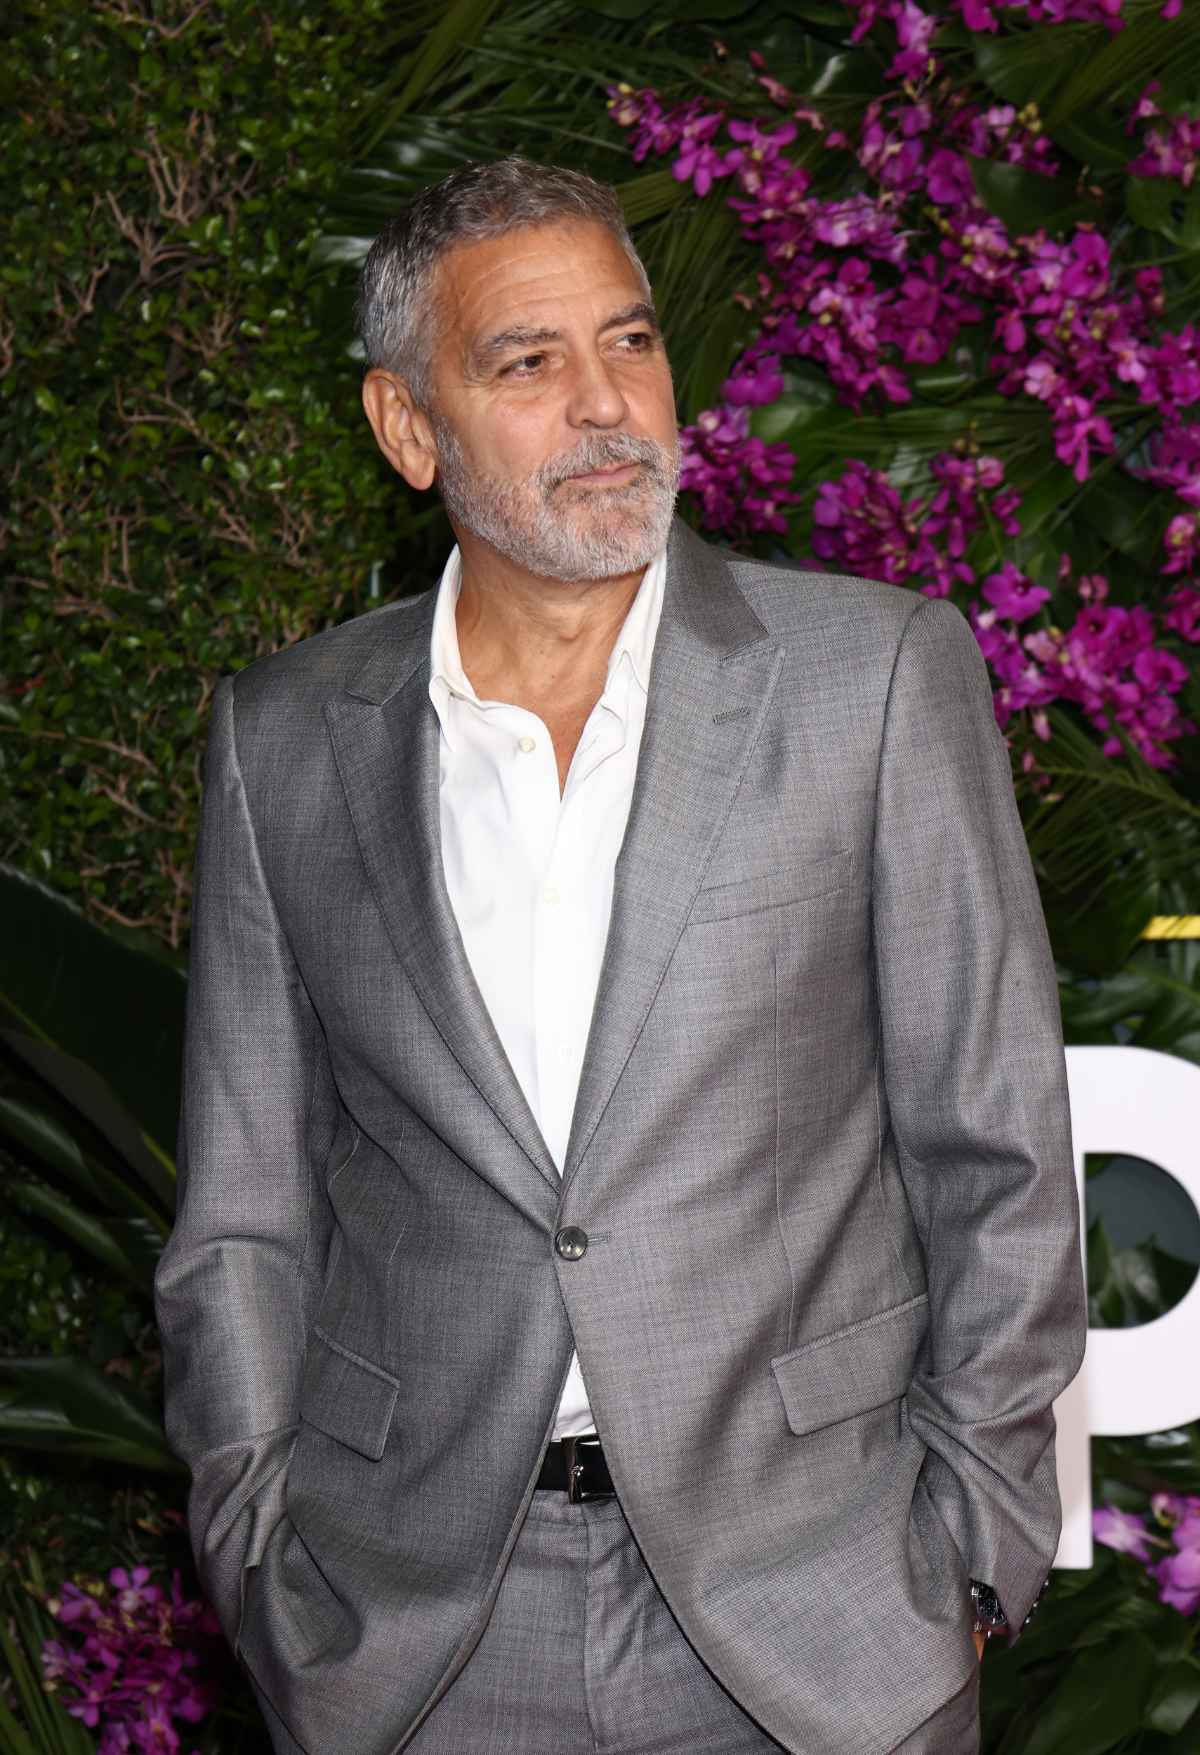 Giorgio Armani Teams With George Clooney For “Ticket To Paradise” Wardrobe Collaboration